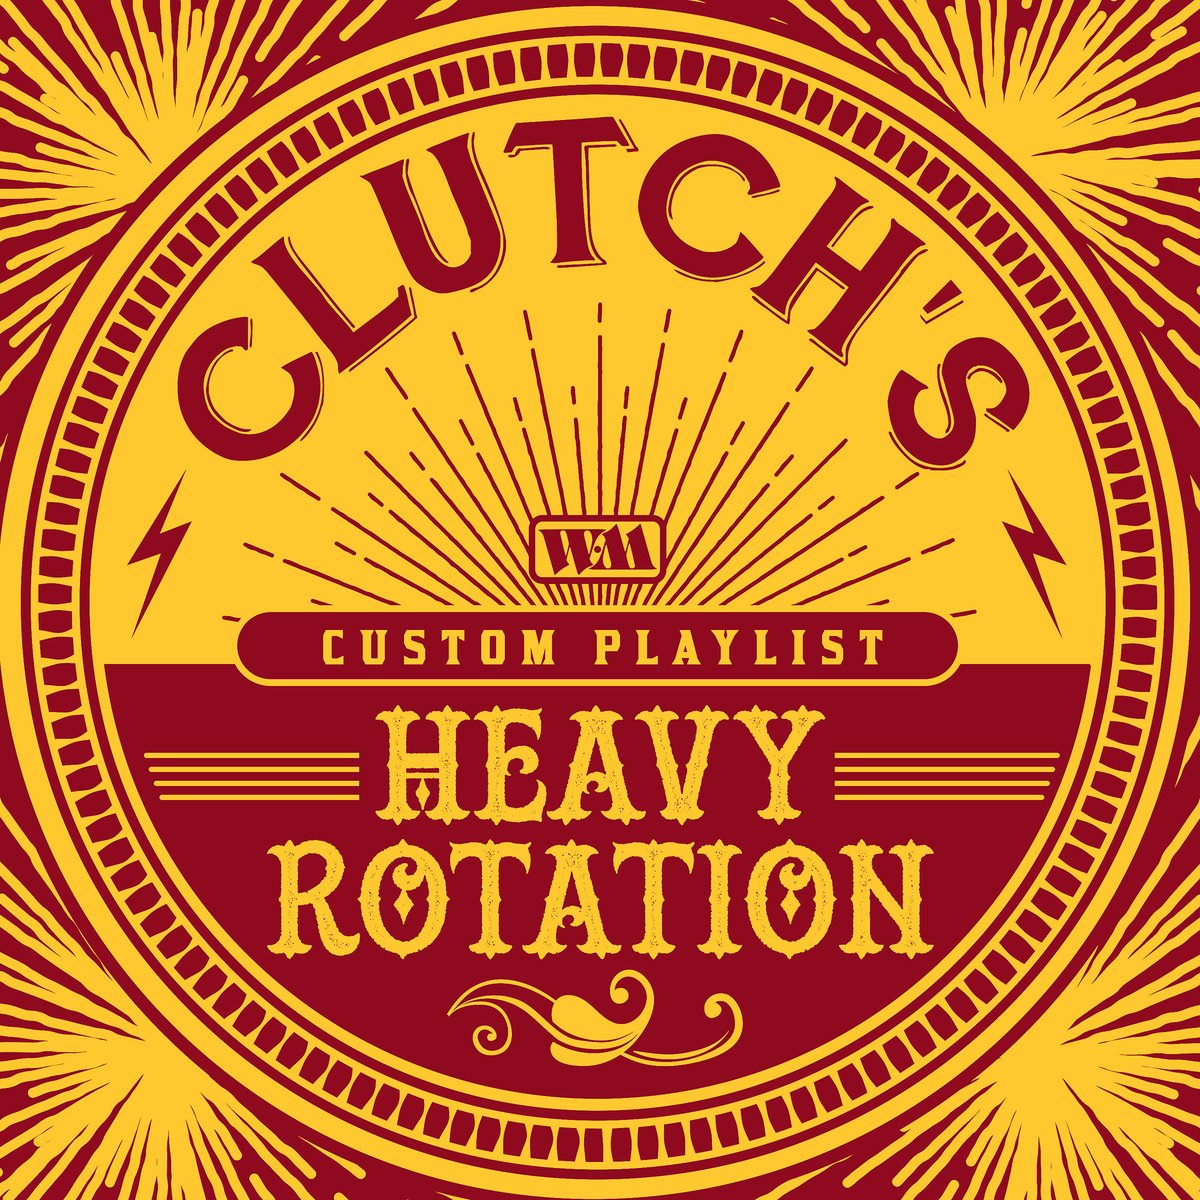 Check out Neil's updated version of 'Clutch's Heavy Rotation' playlist on Spotify. Make sure to follow the playlist as it changes over time. open.spotify.com/playlist/3NlZs…